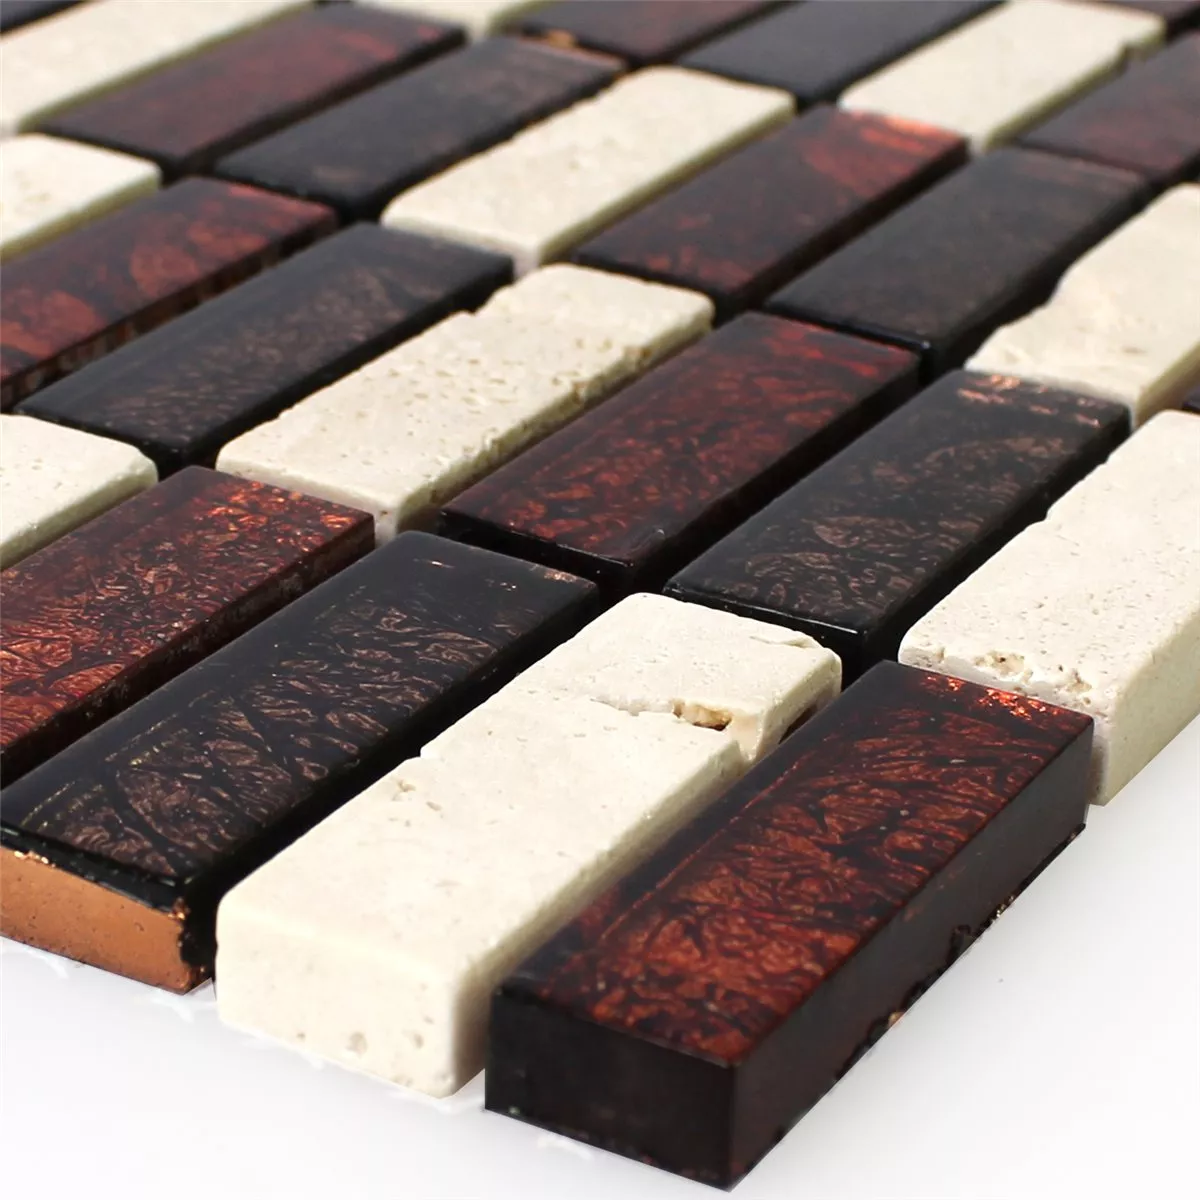 Sample Mosaic Tiles Natural Stone Glass Red Brown Beige Stick